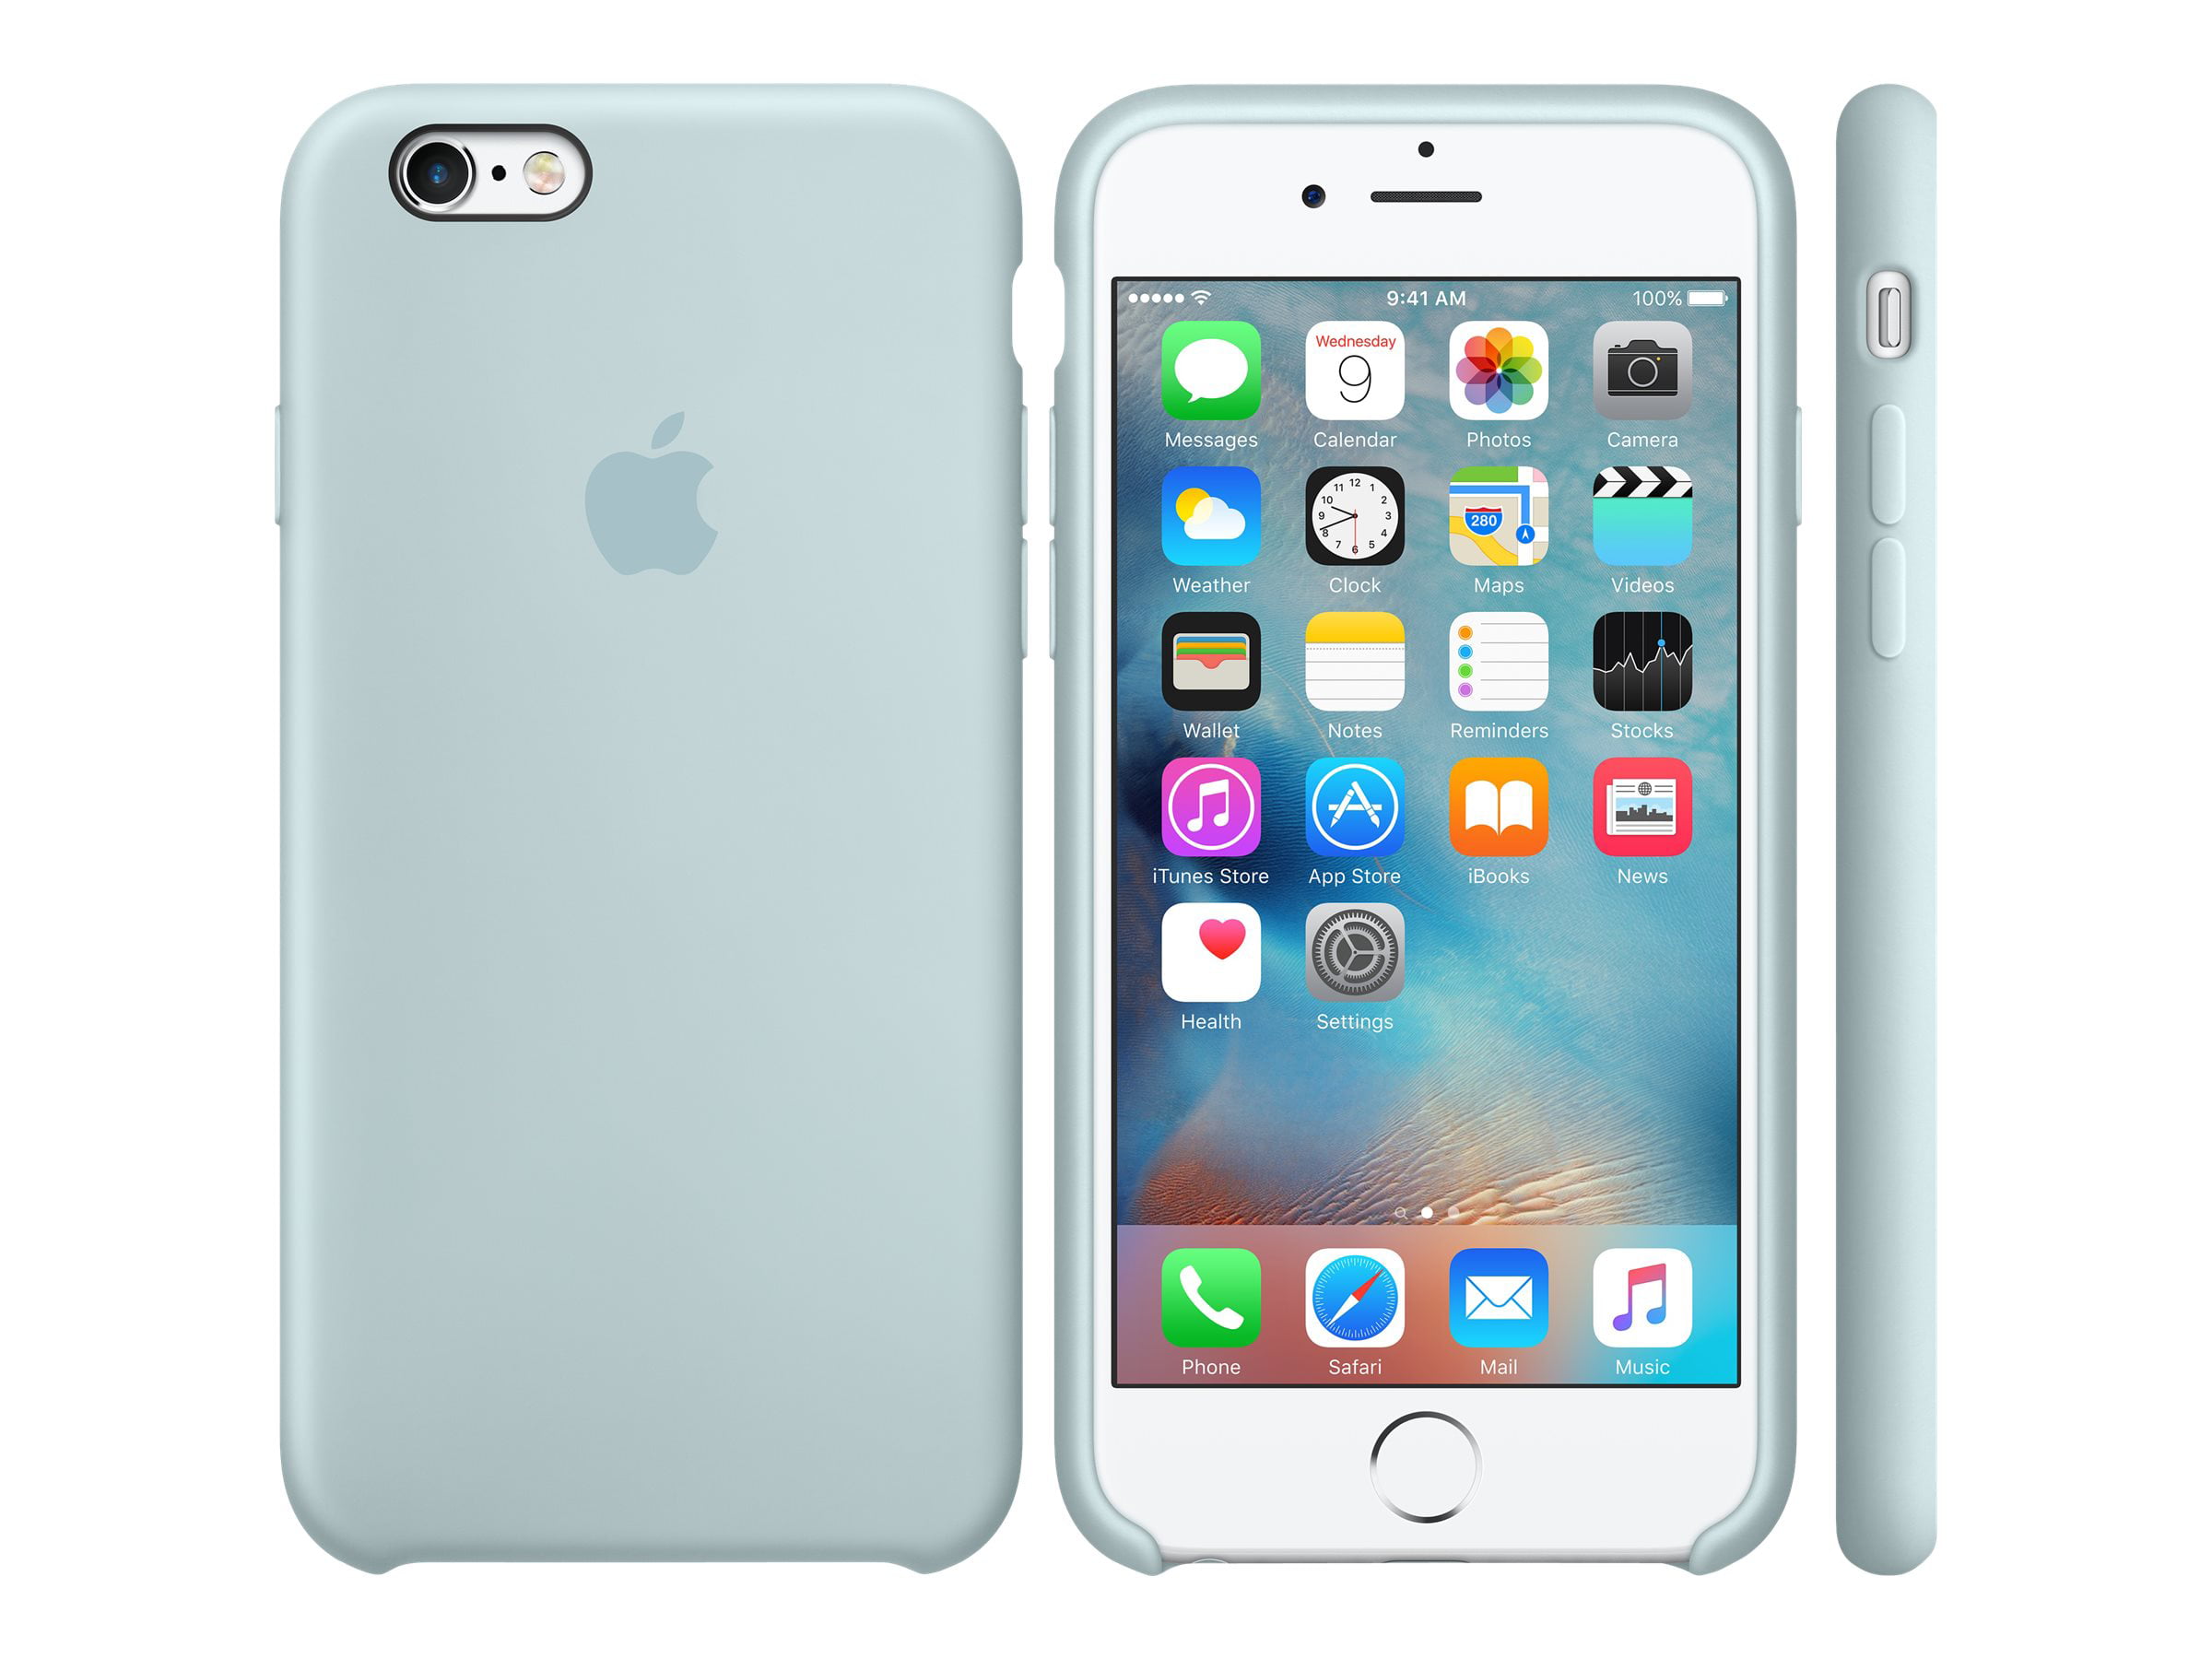 Apple Silicone Case for iPhone 6s - Mint - Walmart.com